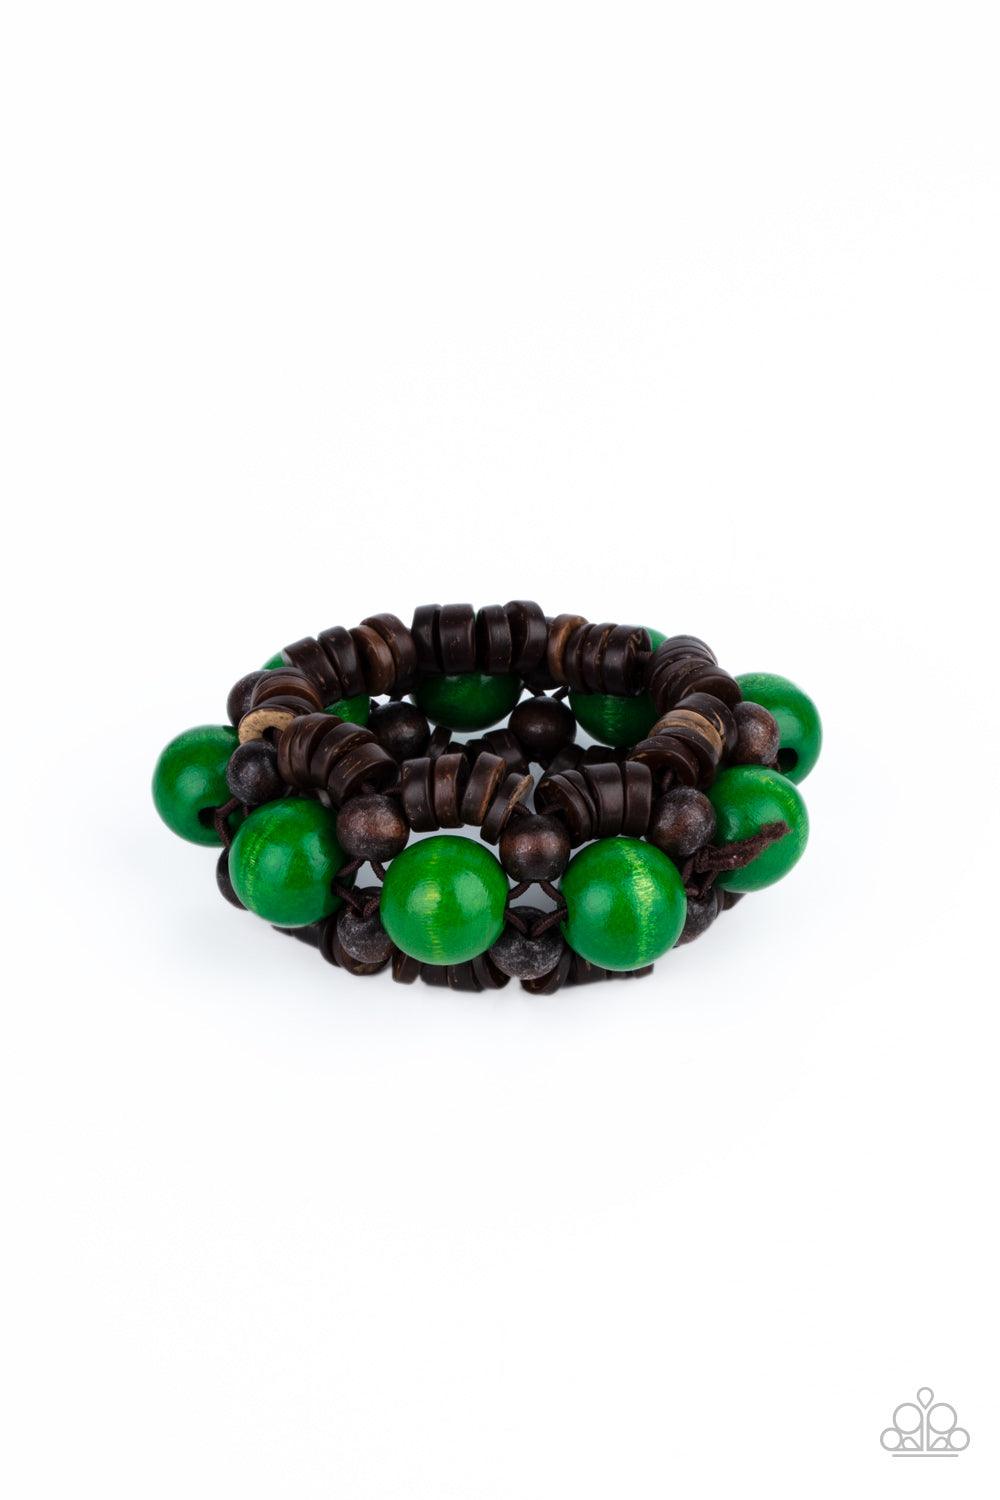 Paparazzi Accessories Tropical Temptations - Green Oversized green wooden beads, rustic brown wooden beads, and dainty wooden discs are ornately threaded along braided stretchy bands around the wrist, creating a summery centerpiece. Sold as one individual